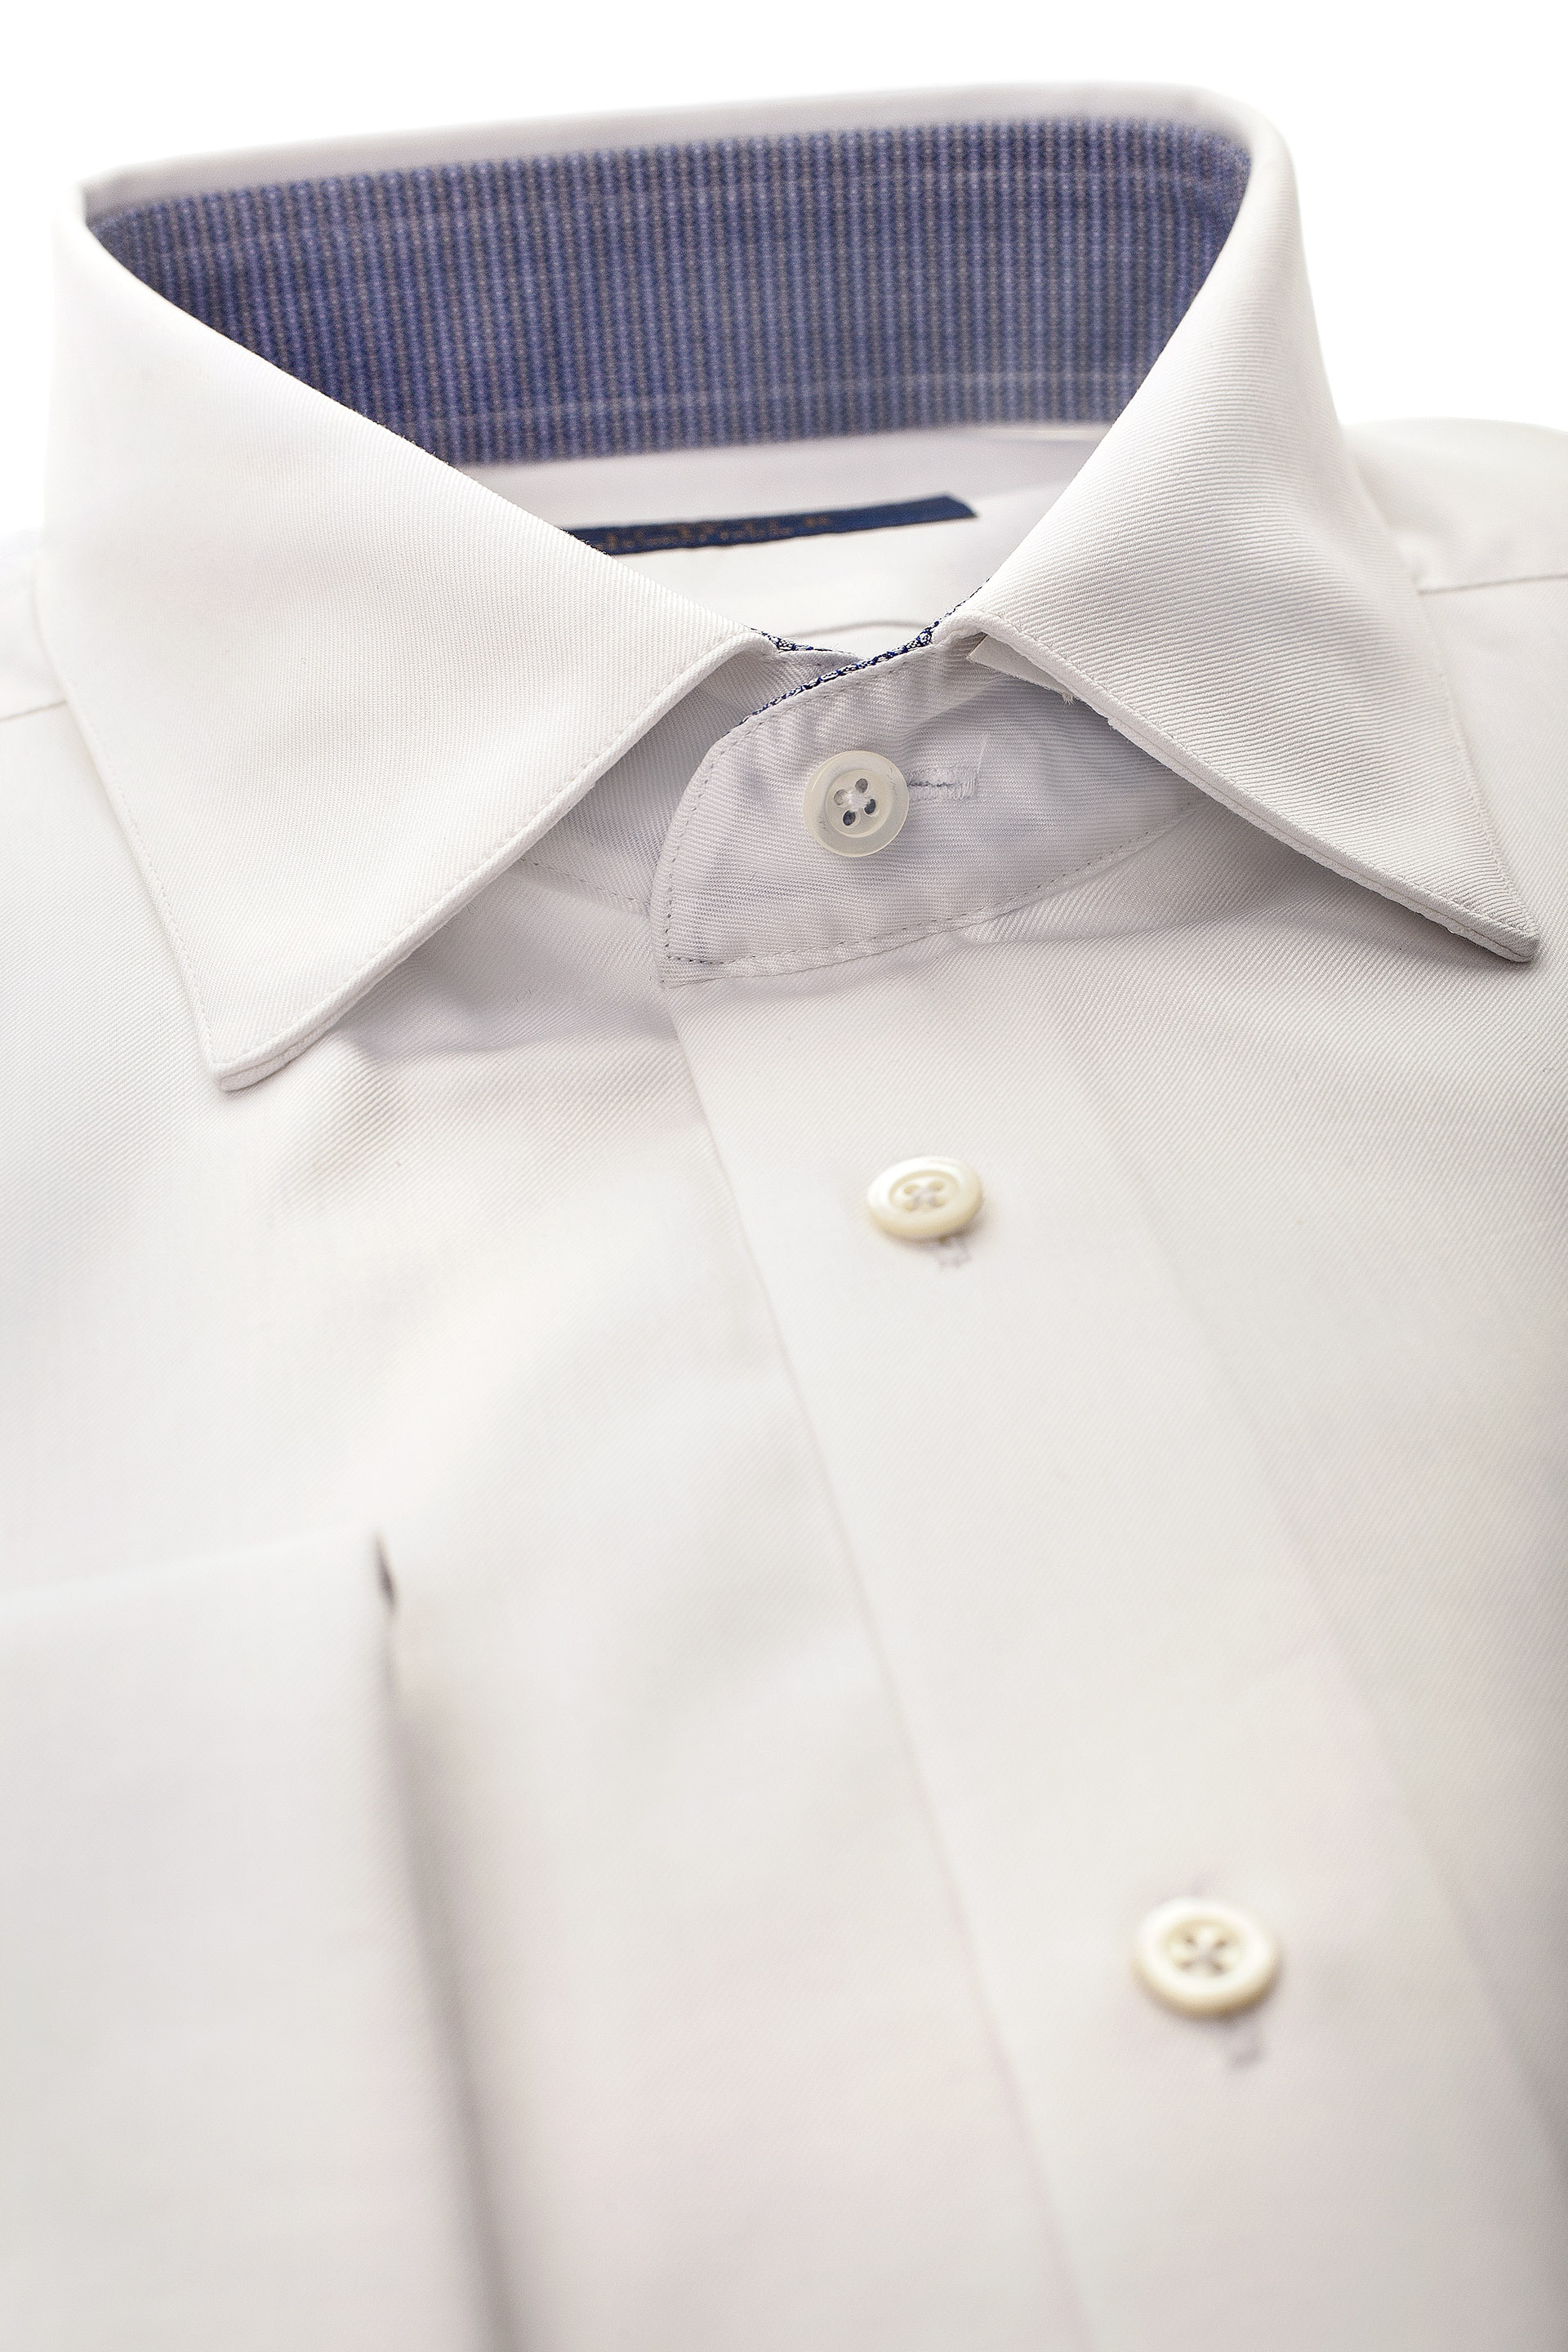 White shirt with cufflinks | Shirts | Suits | Custom Suits | Groom Suits